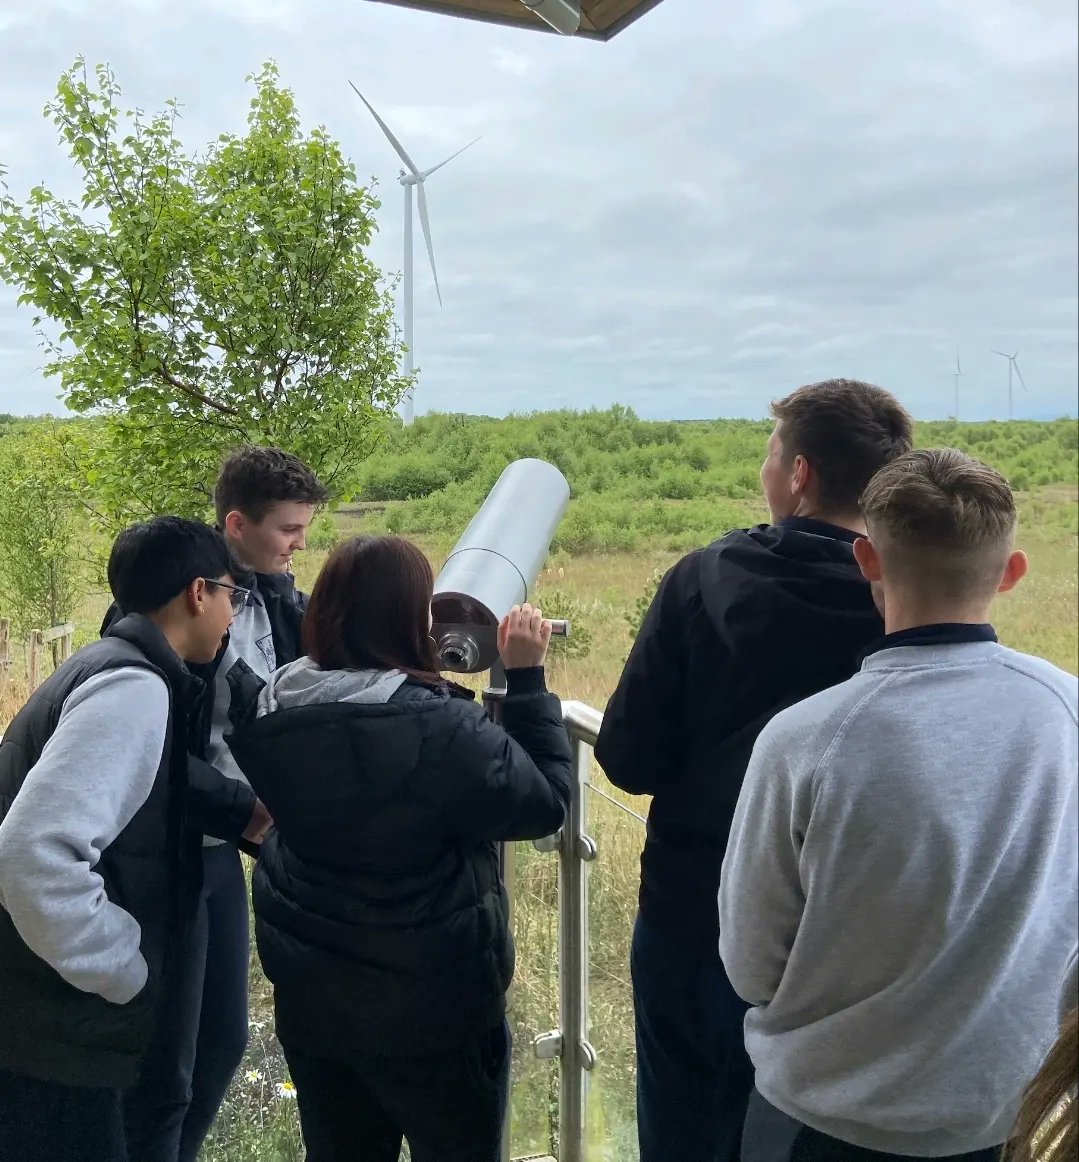 Yesterday, our TYs took a trip to Mount Lucas Wind Farm! Here, students learned about wind energy and sustainability. Thank you to all at Mount Lucas Wind Farm for having us!🤩 #hfcsrathcoole #windfarm #ty